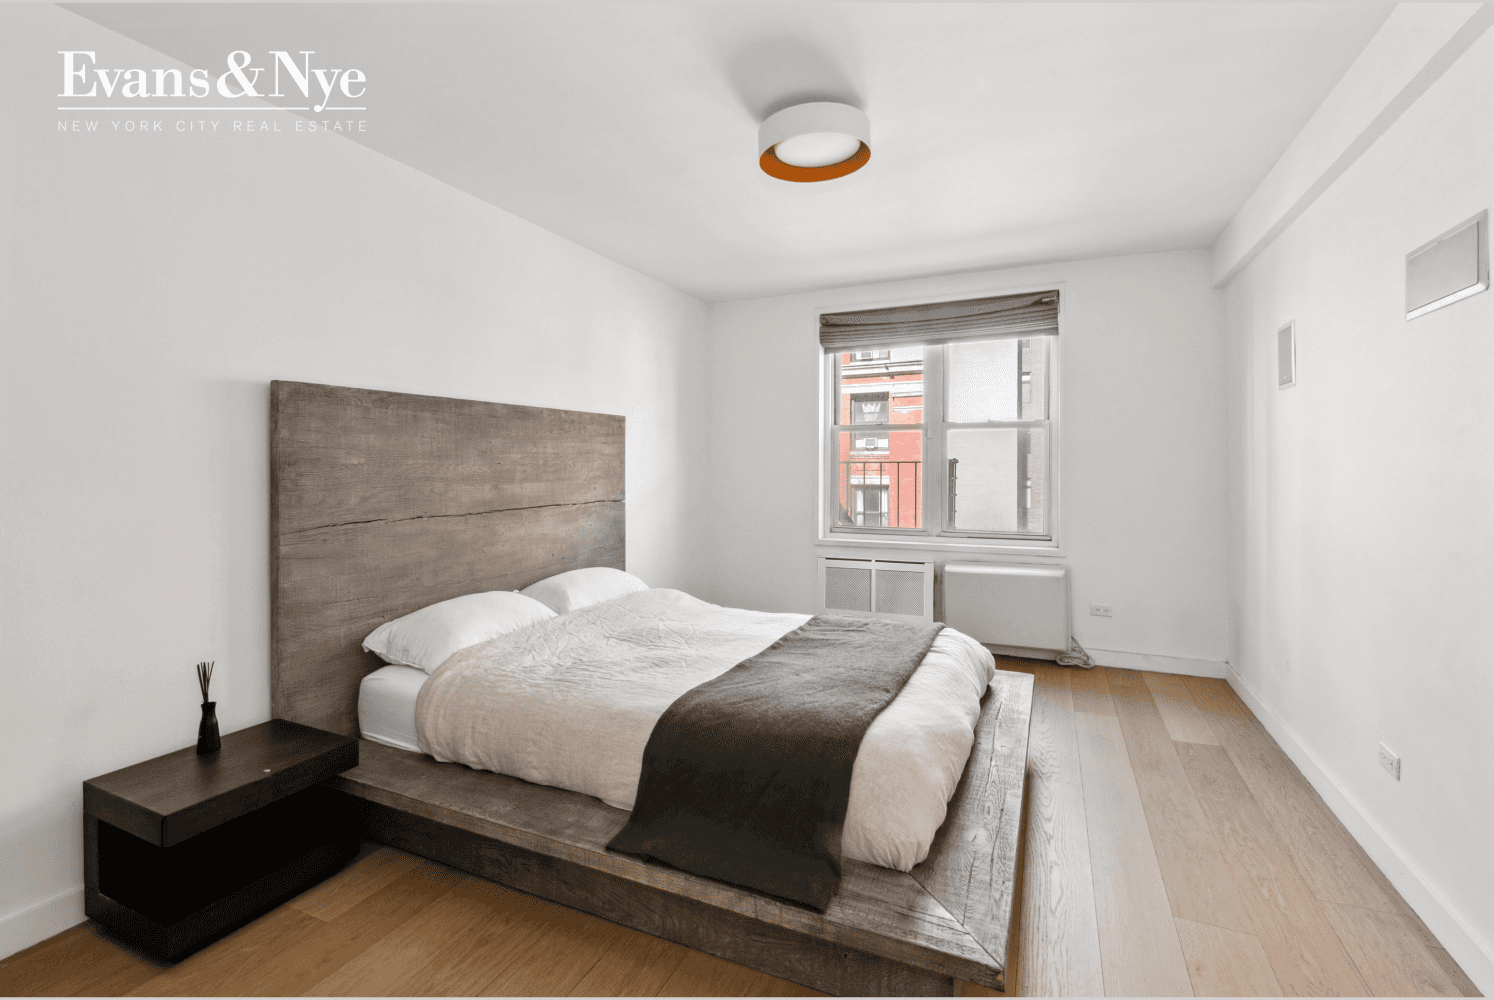 Apartment 4H is a spacious one bedroom and one bathroom co operative with large north facing windows over a quiet stretch of Bleecker Steet.